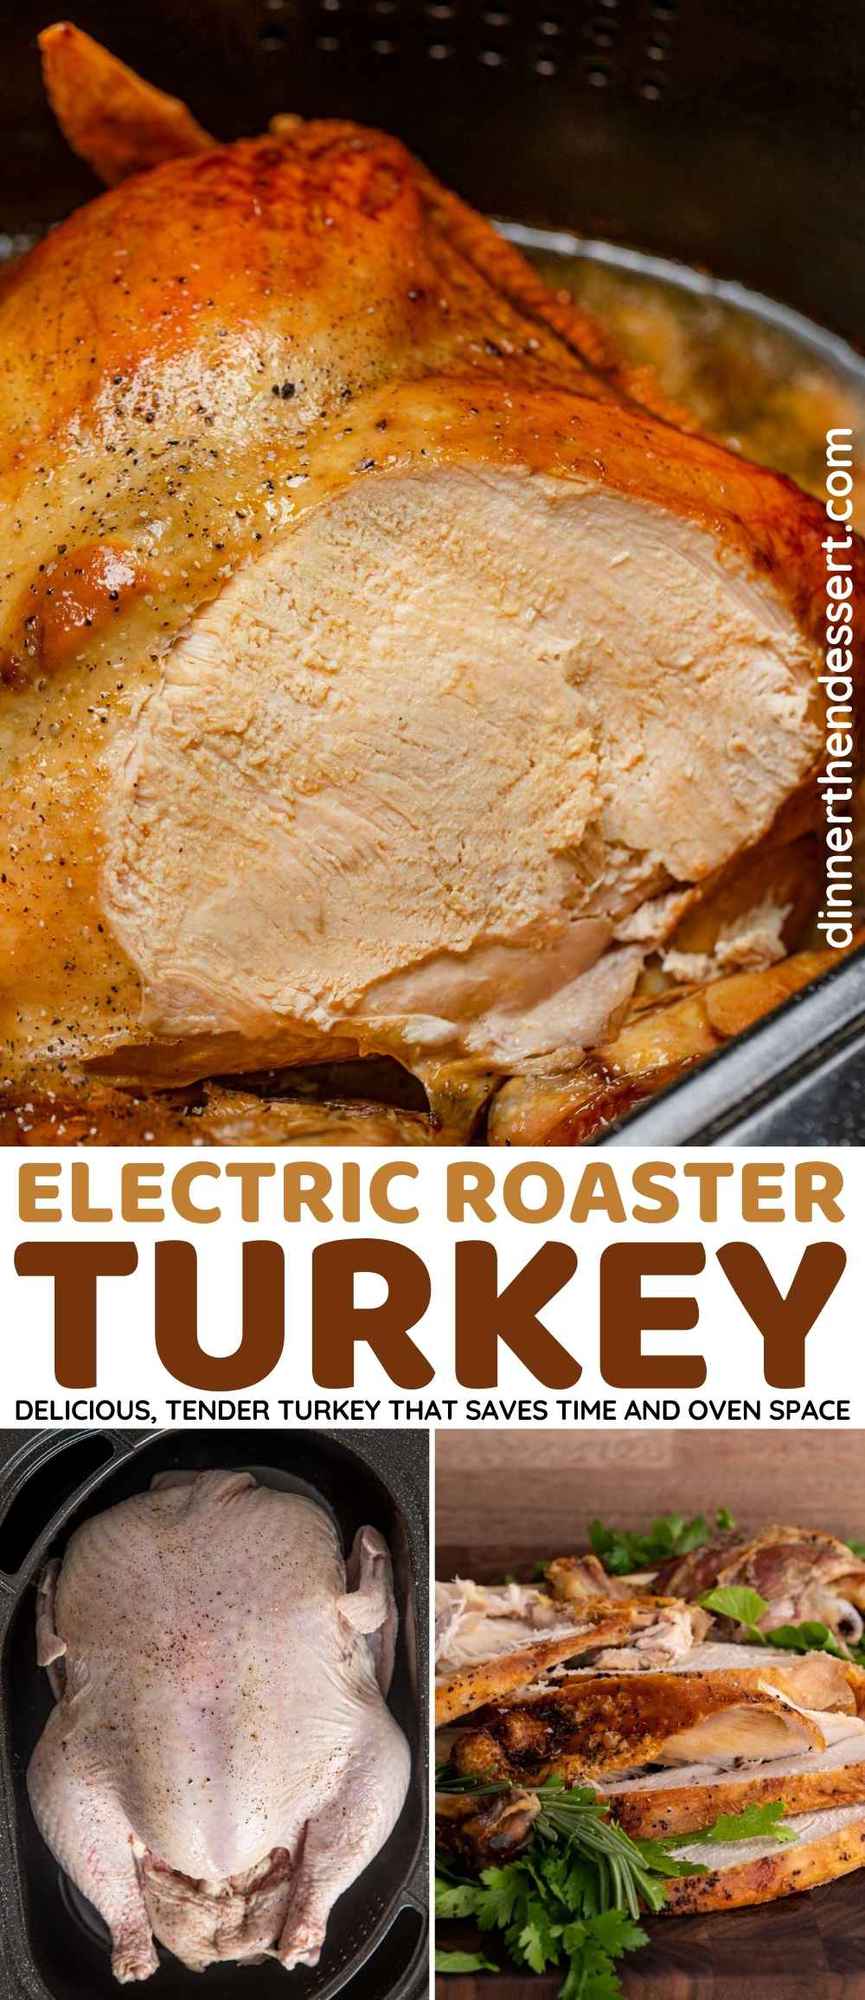 do you cover turkey when roasting